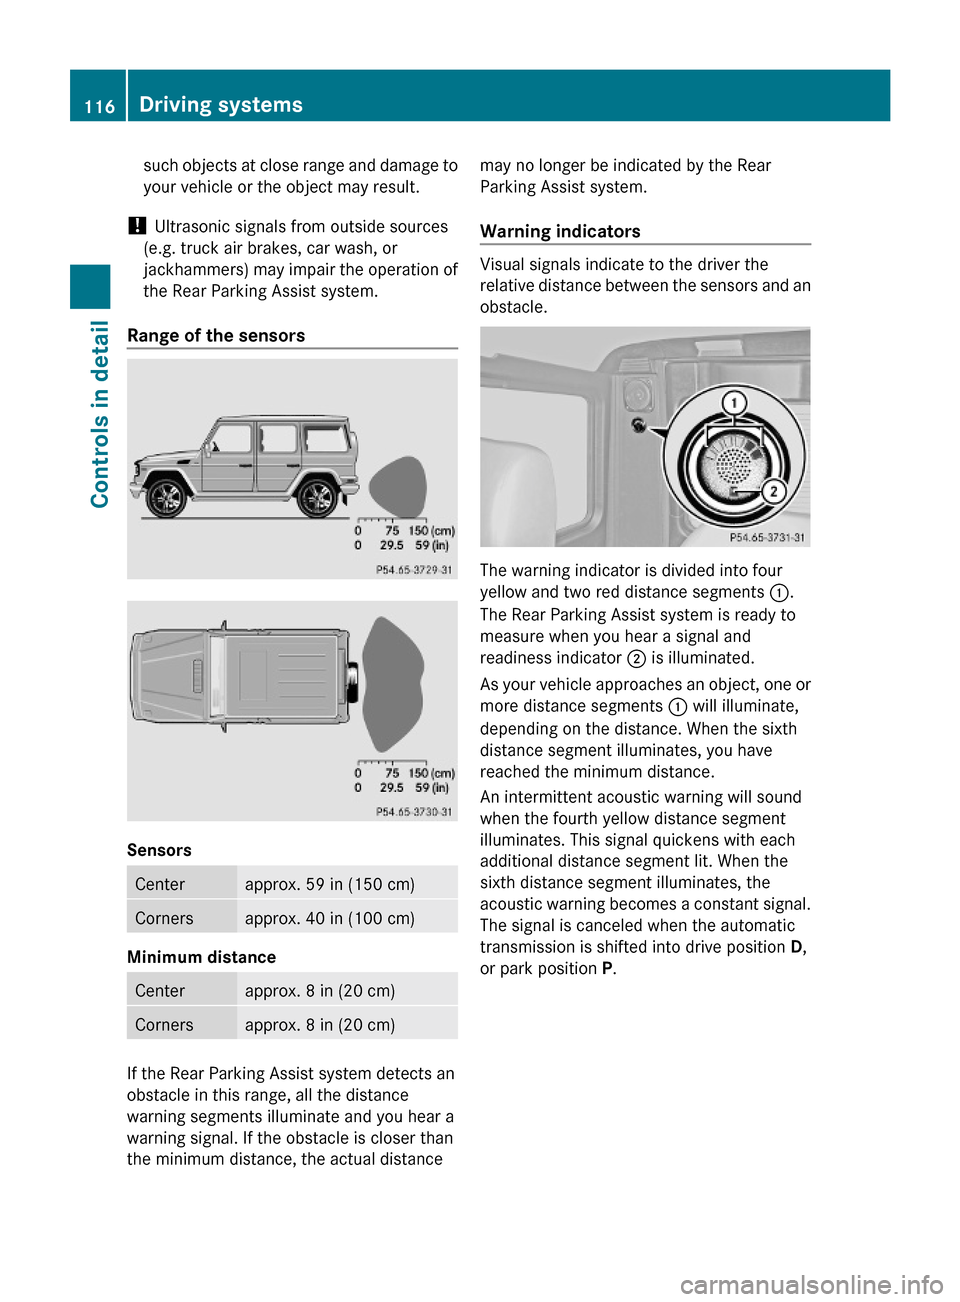 MERCEDES-BENZ G-Class 2009 W463 Owners Manual such objects at close range and damage to
your vehicle or the object may result.
! Ultrasonic signals from outside sources
(e.g. truck air brakes, car wash, or
jackhammers) may impair the operation of